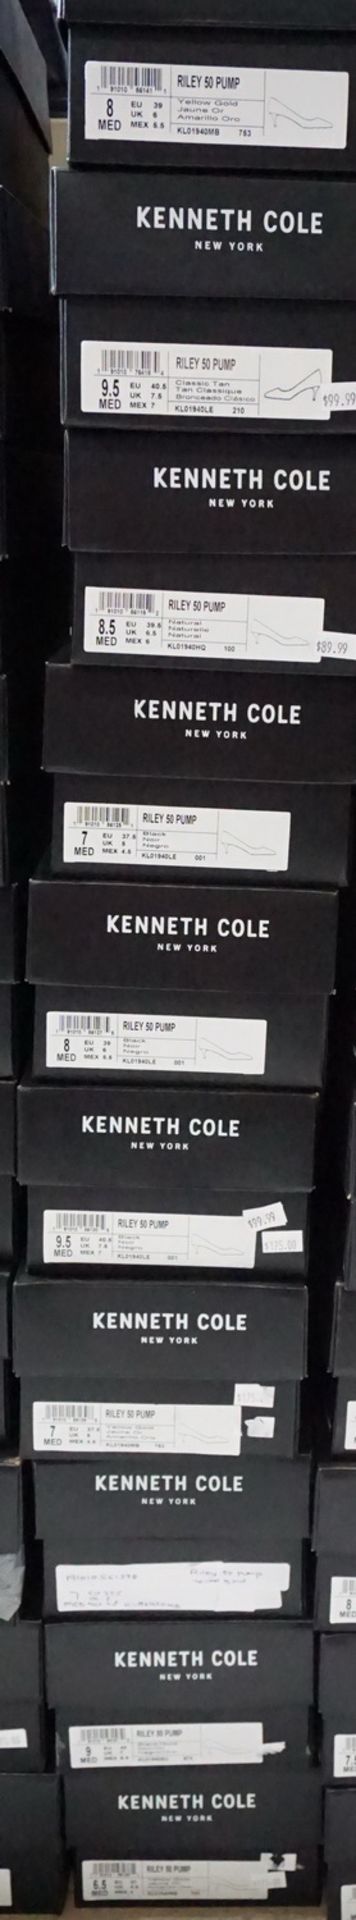 PAIRS - KENNETH COLE RILEY 50 WOMENS PUMPS - Image 5 of 8